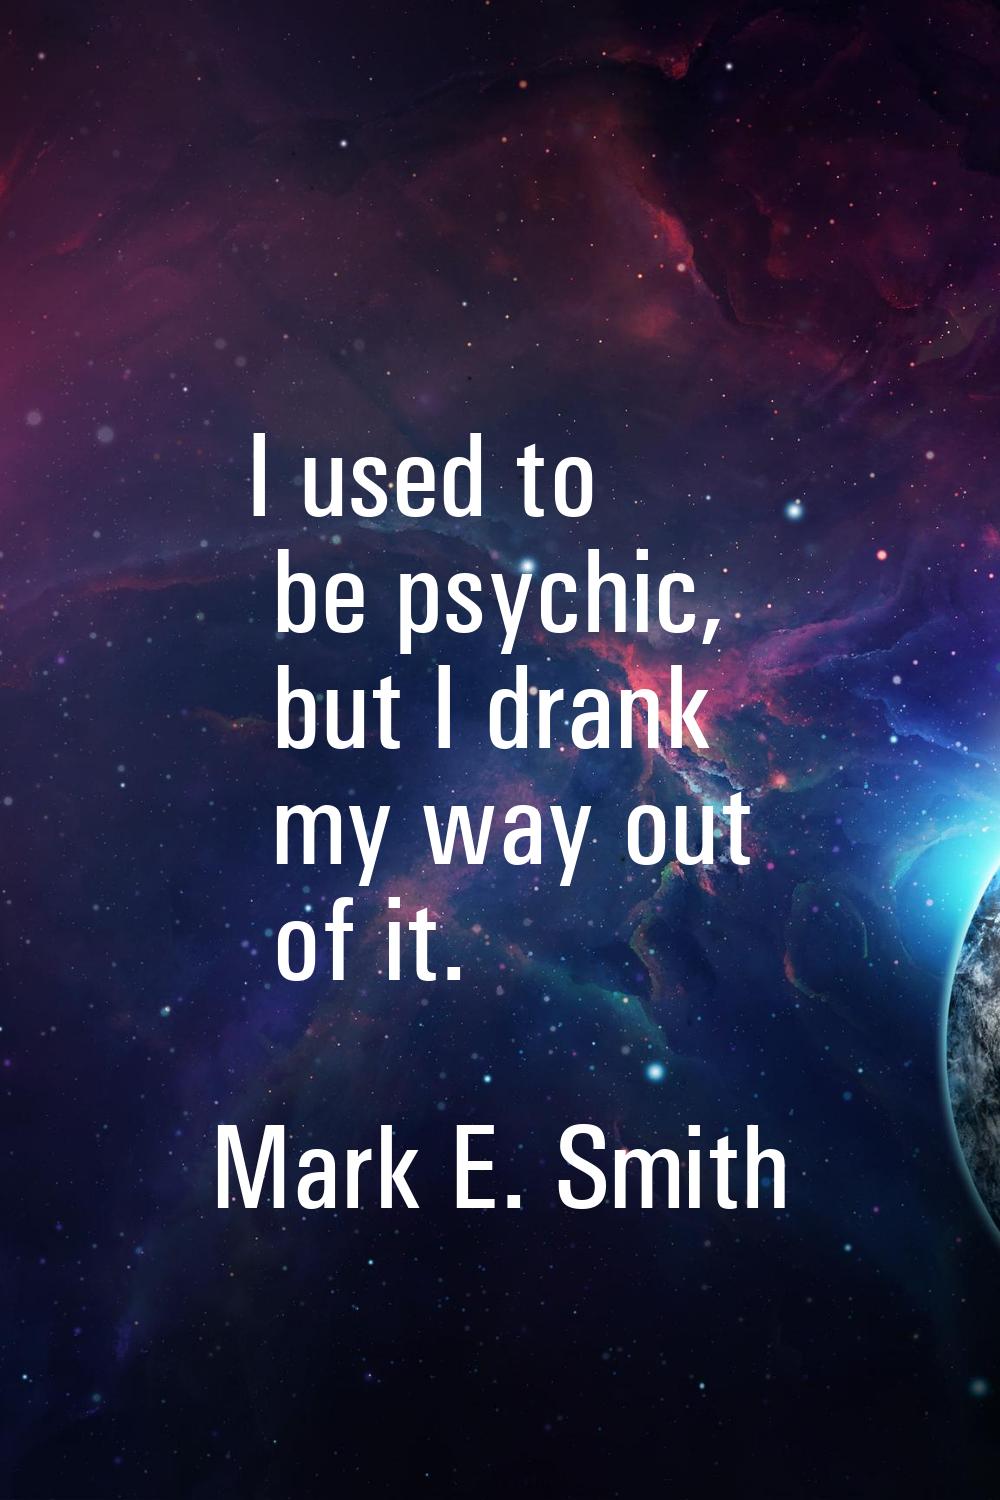 I used to be psychic, but I drank my way out of it.